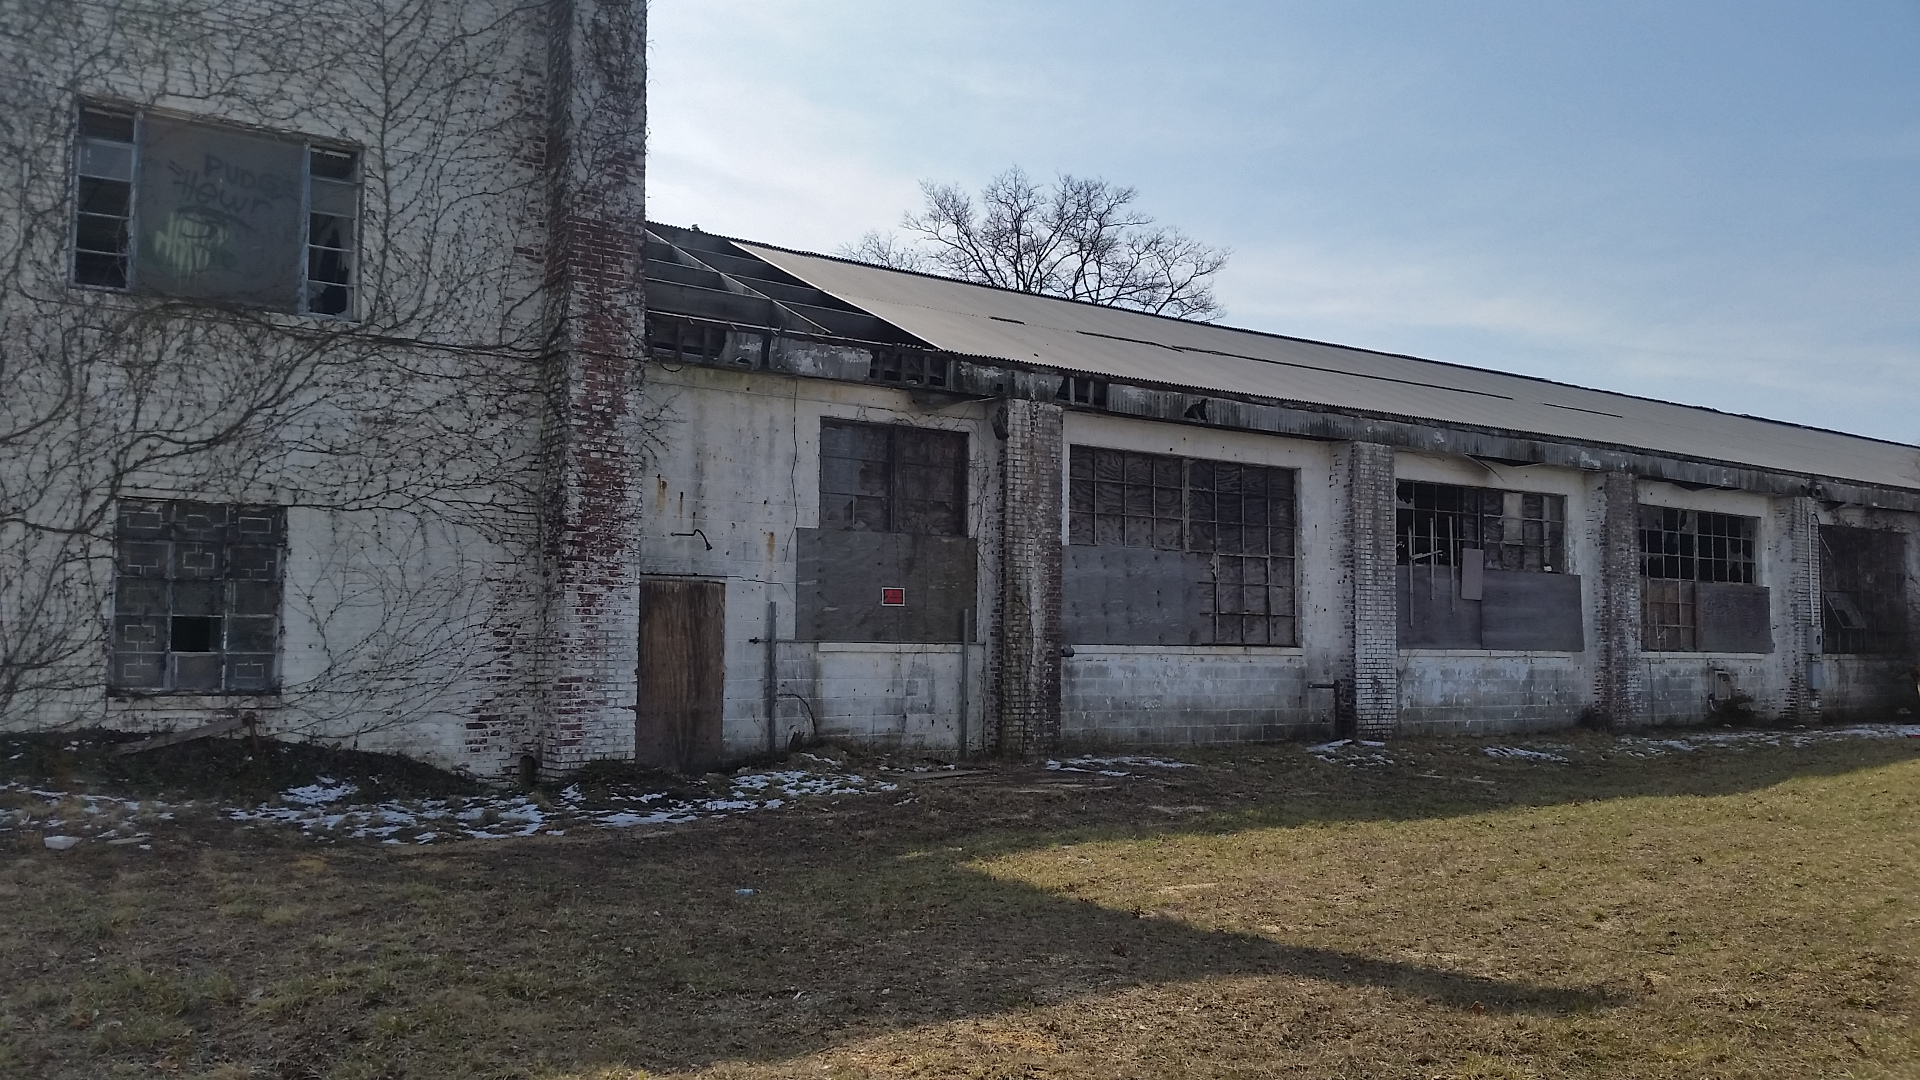 The Copiague site was built in 1951. It has been abandoned for three decades, officials said. (Rashed Mian/Long Island Press)